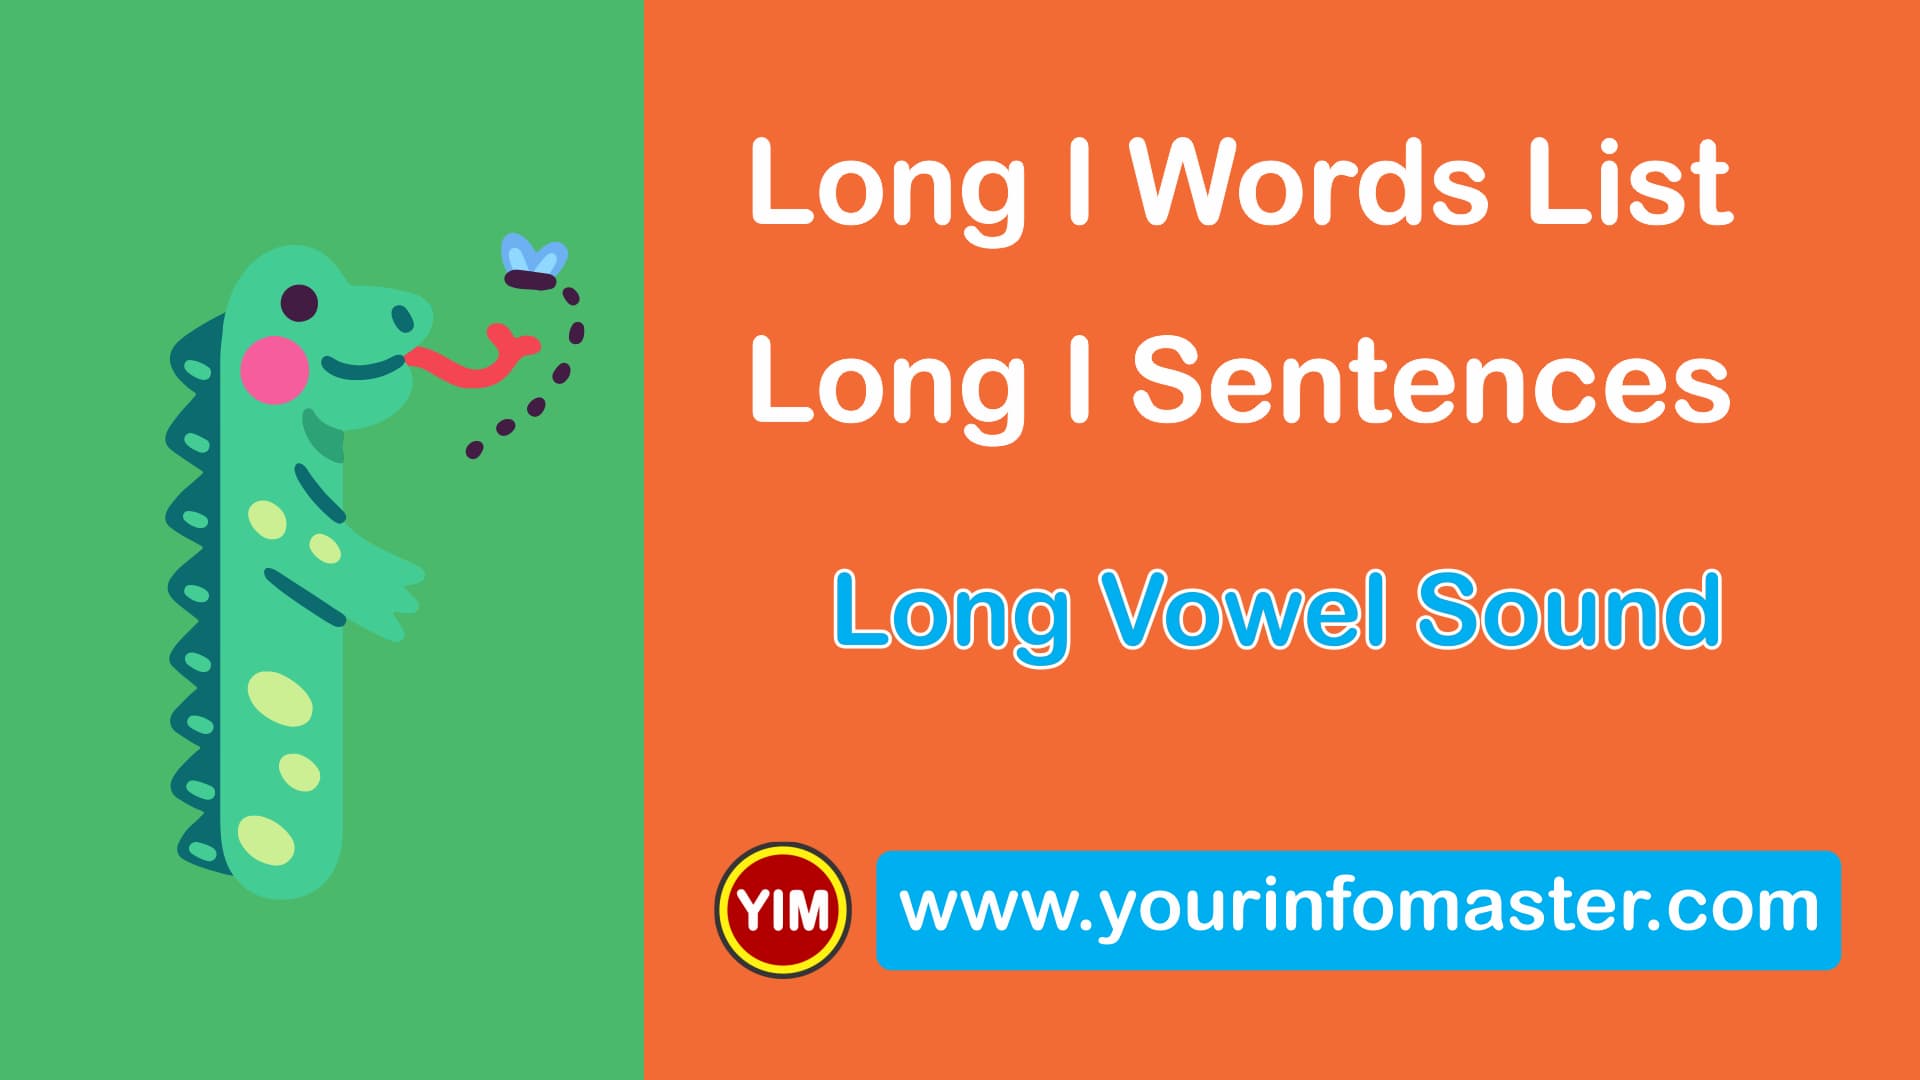 awesome words, cool long words, cool words, i words, Learning Spellings, Long I sound words, Long I words, Long I Words List, Long I Words Worksheets, Long versus Short Vowels, Long Vowel, Long Vowel Examples, Long Vowel Sound, Long Vowel Sounds Examples, Using Long Vowel Sounds, Vowel I Sound, Vowel Pronunciation, What is a Vowel, word of the day for kids